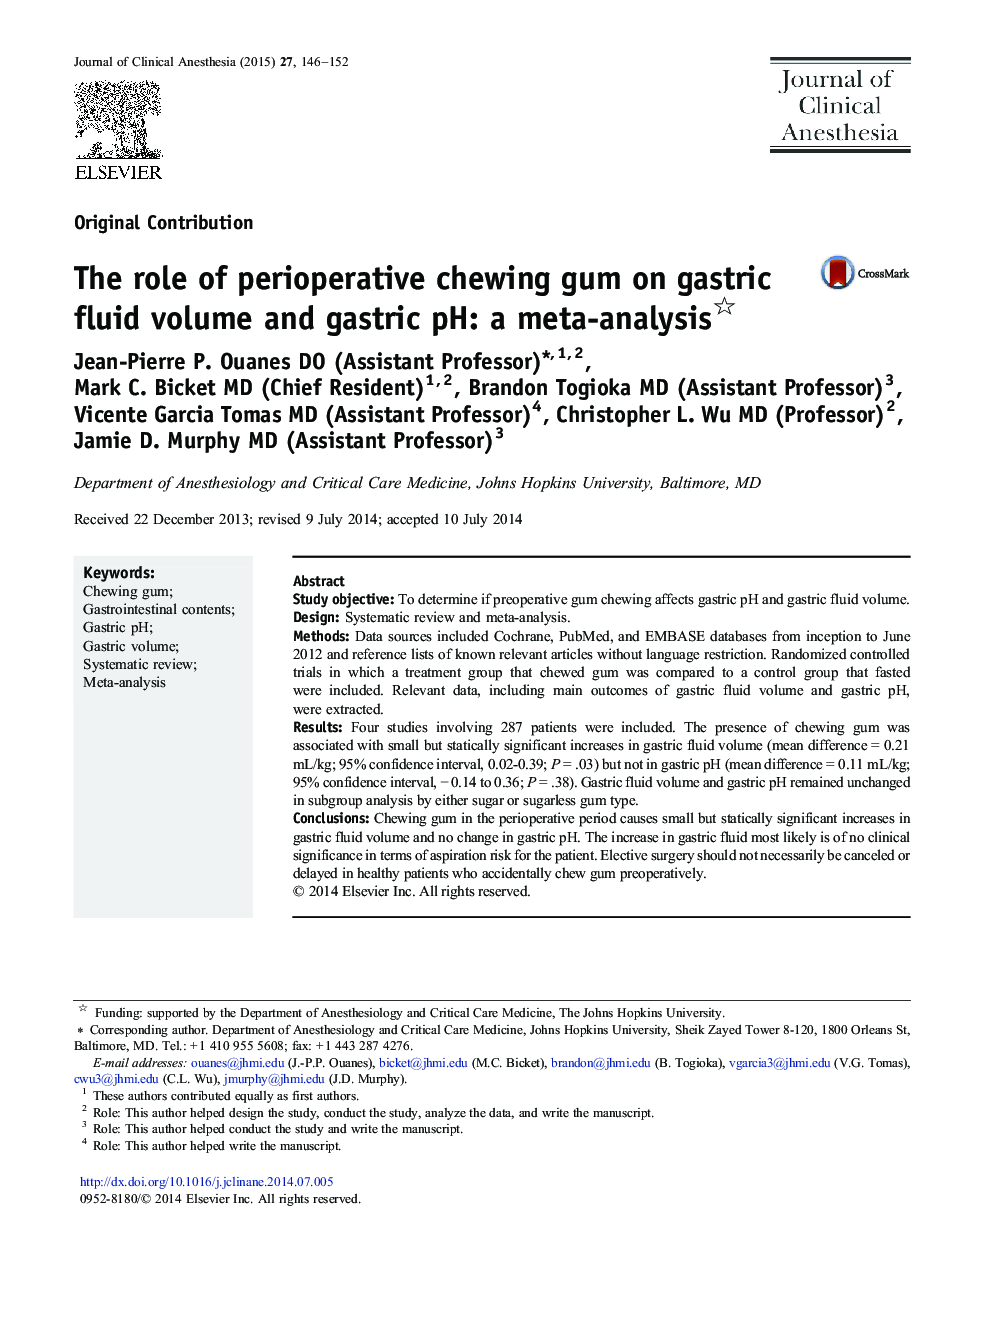 The role of perioperative chewing gum on gastric fluid volume and gastric pH: a meta-analysis 